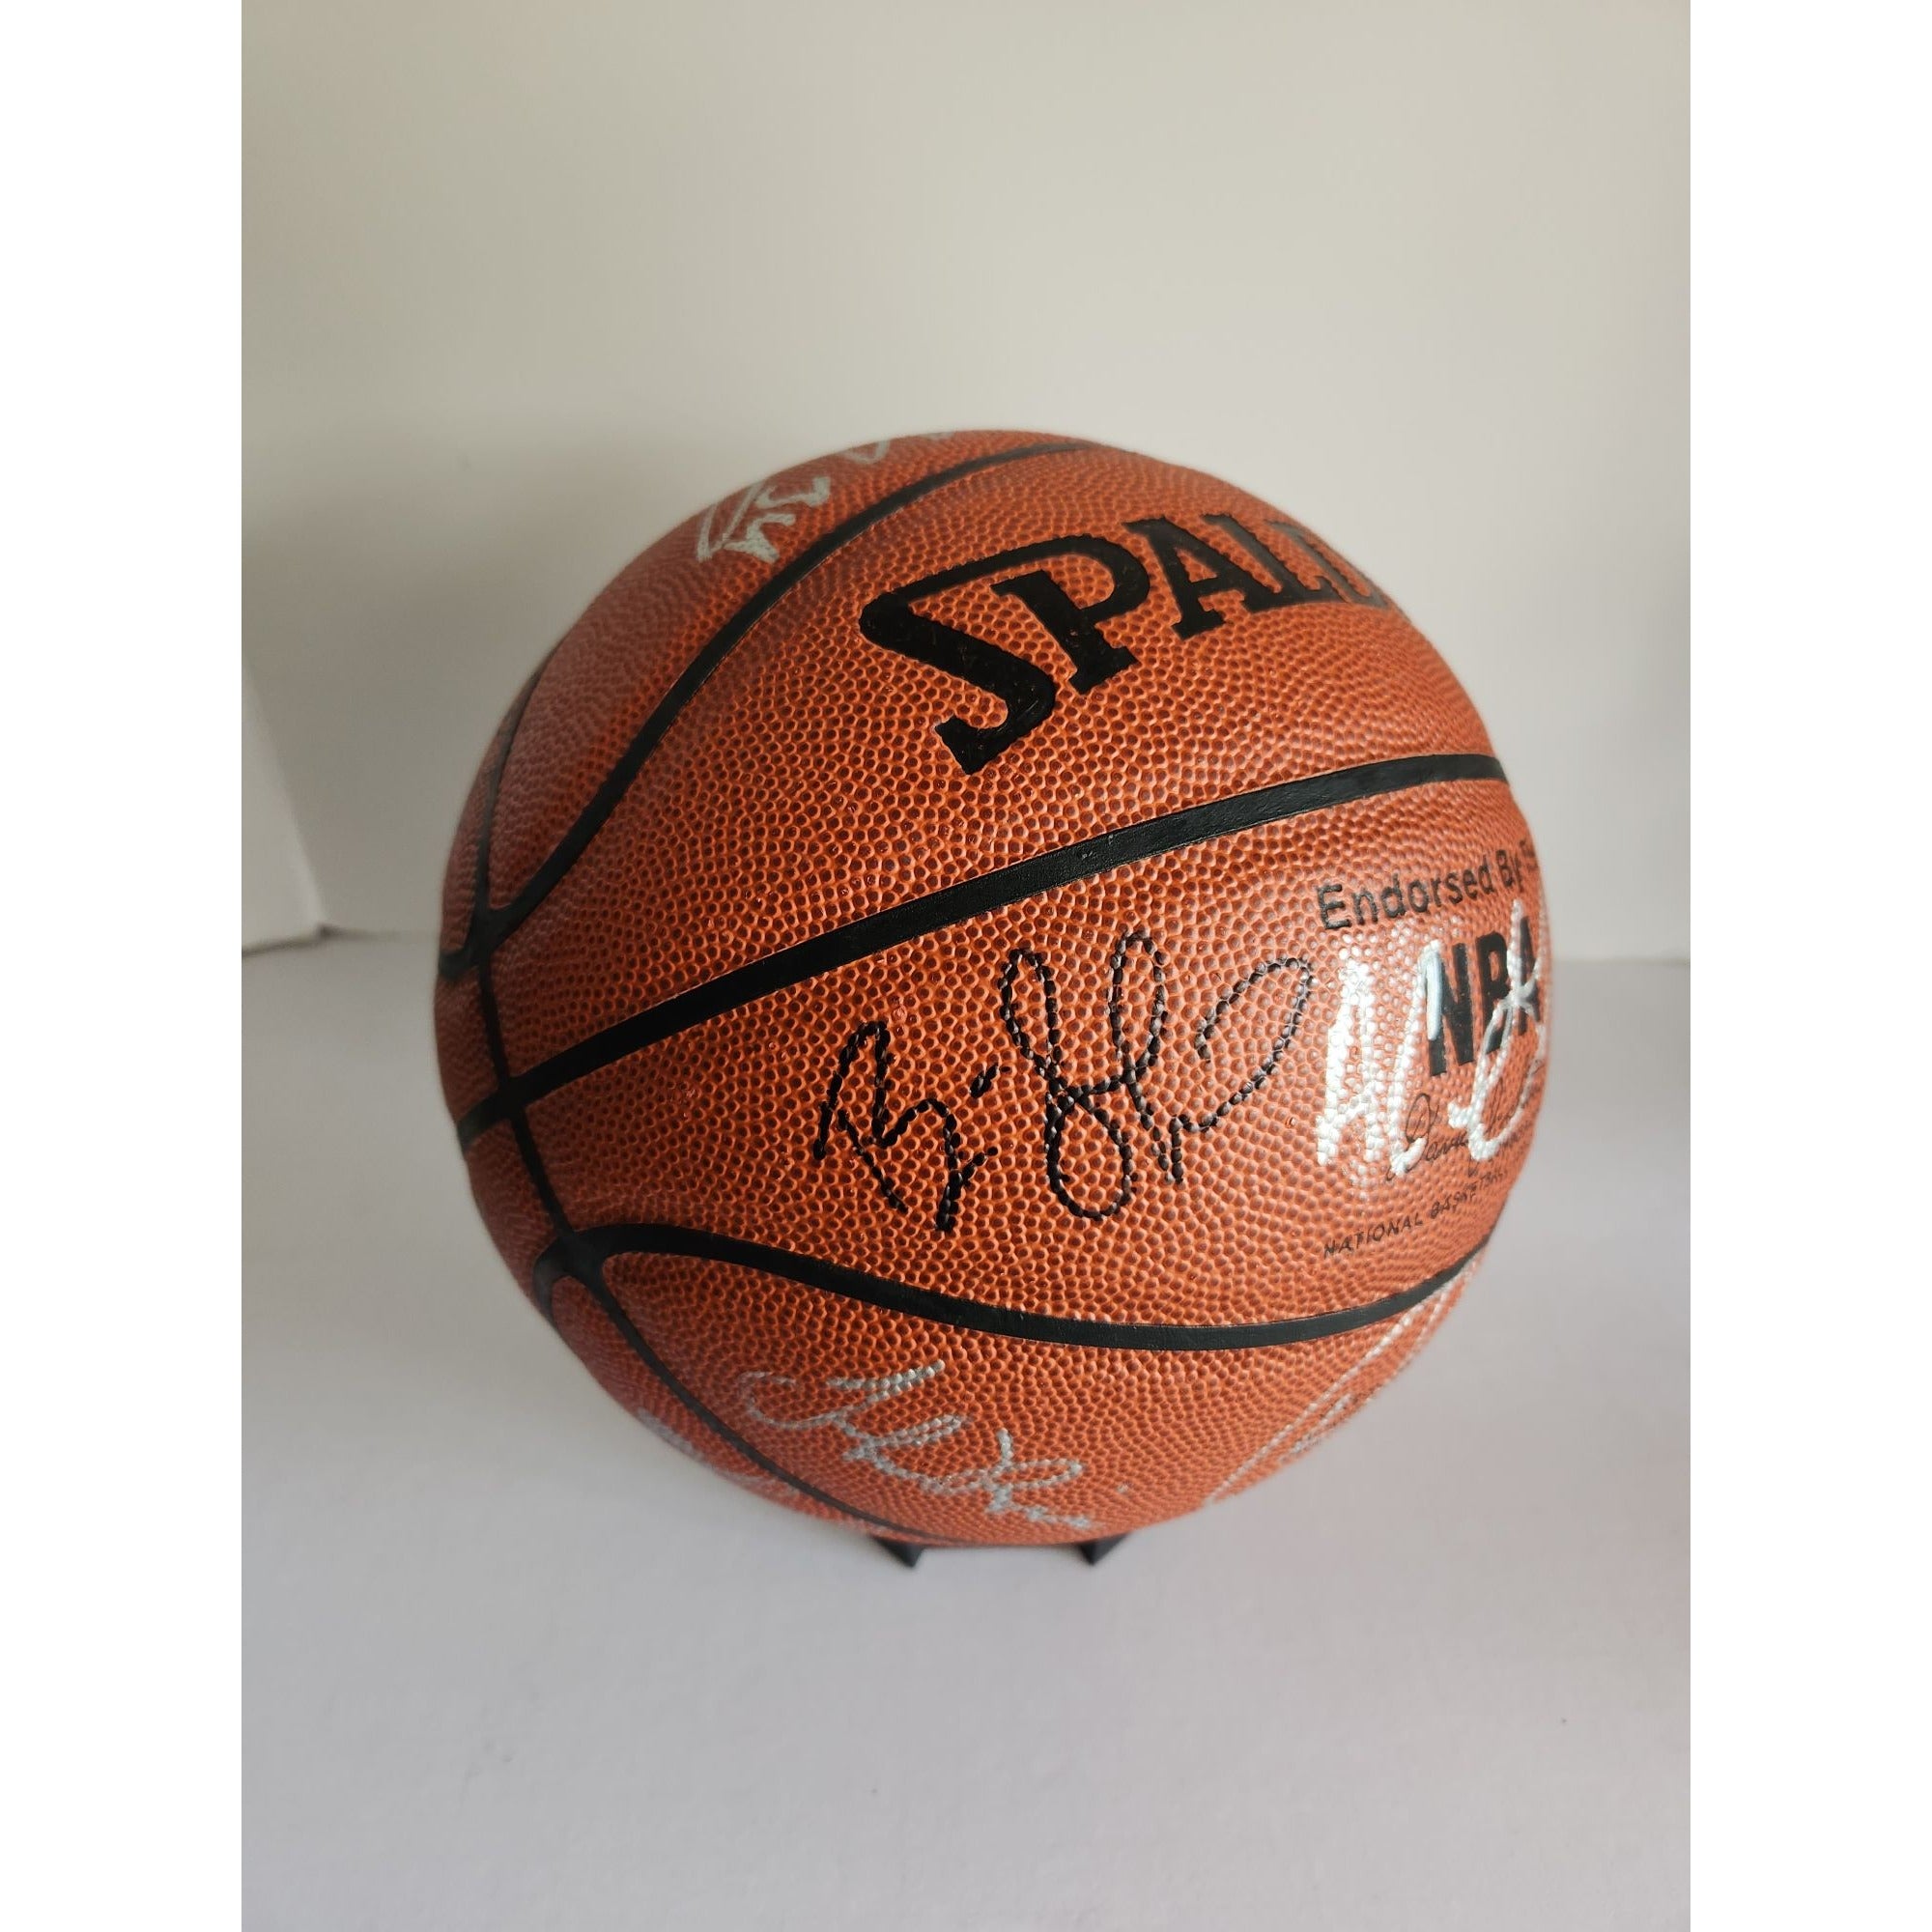 Kobe Bryant Shaquille O'Neal Jerry Buss Jerry West 1999-2000 Los Angeles Lakers team signed NBA Spalding basketball